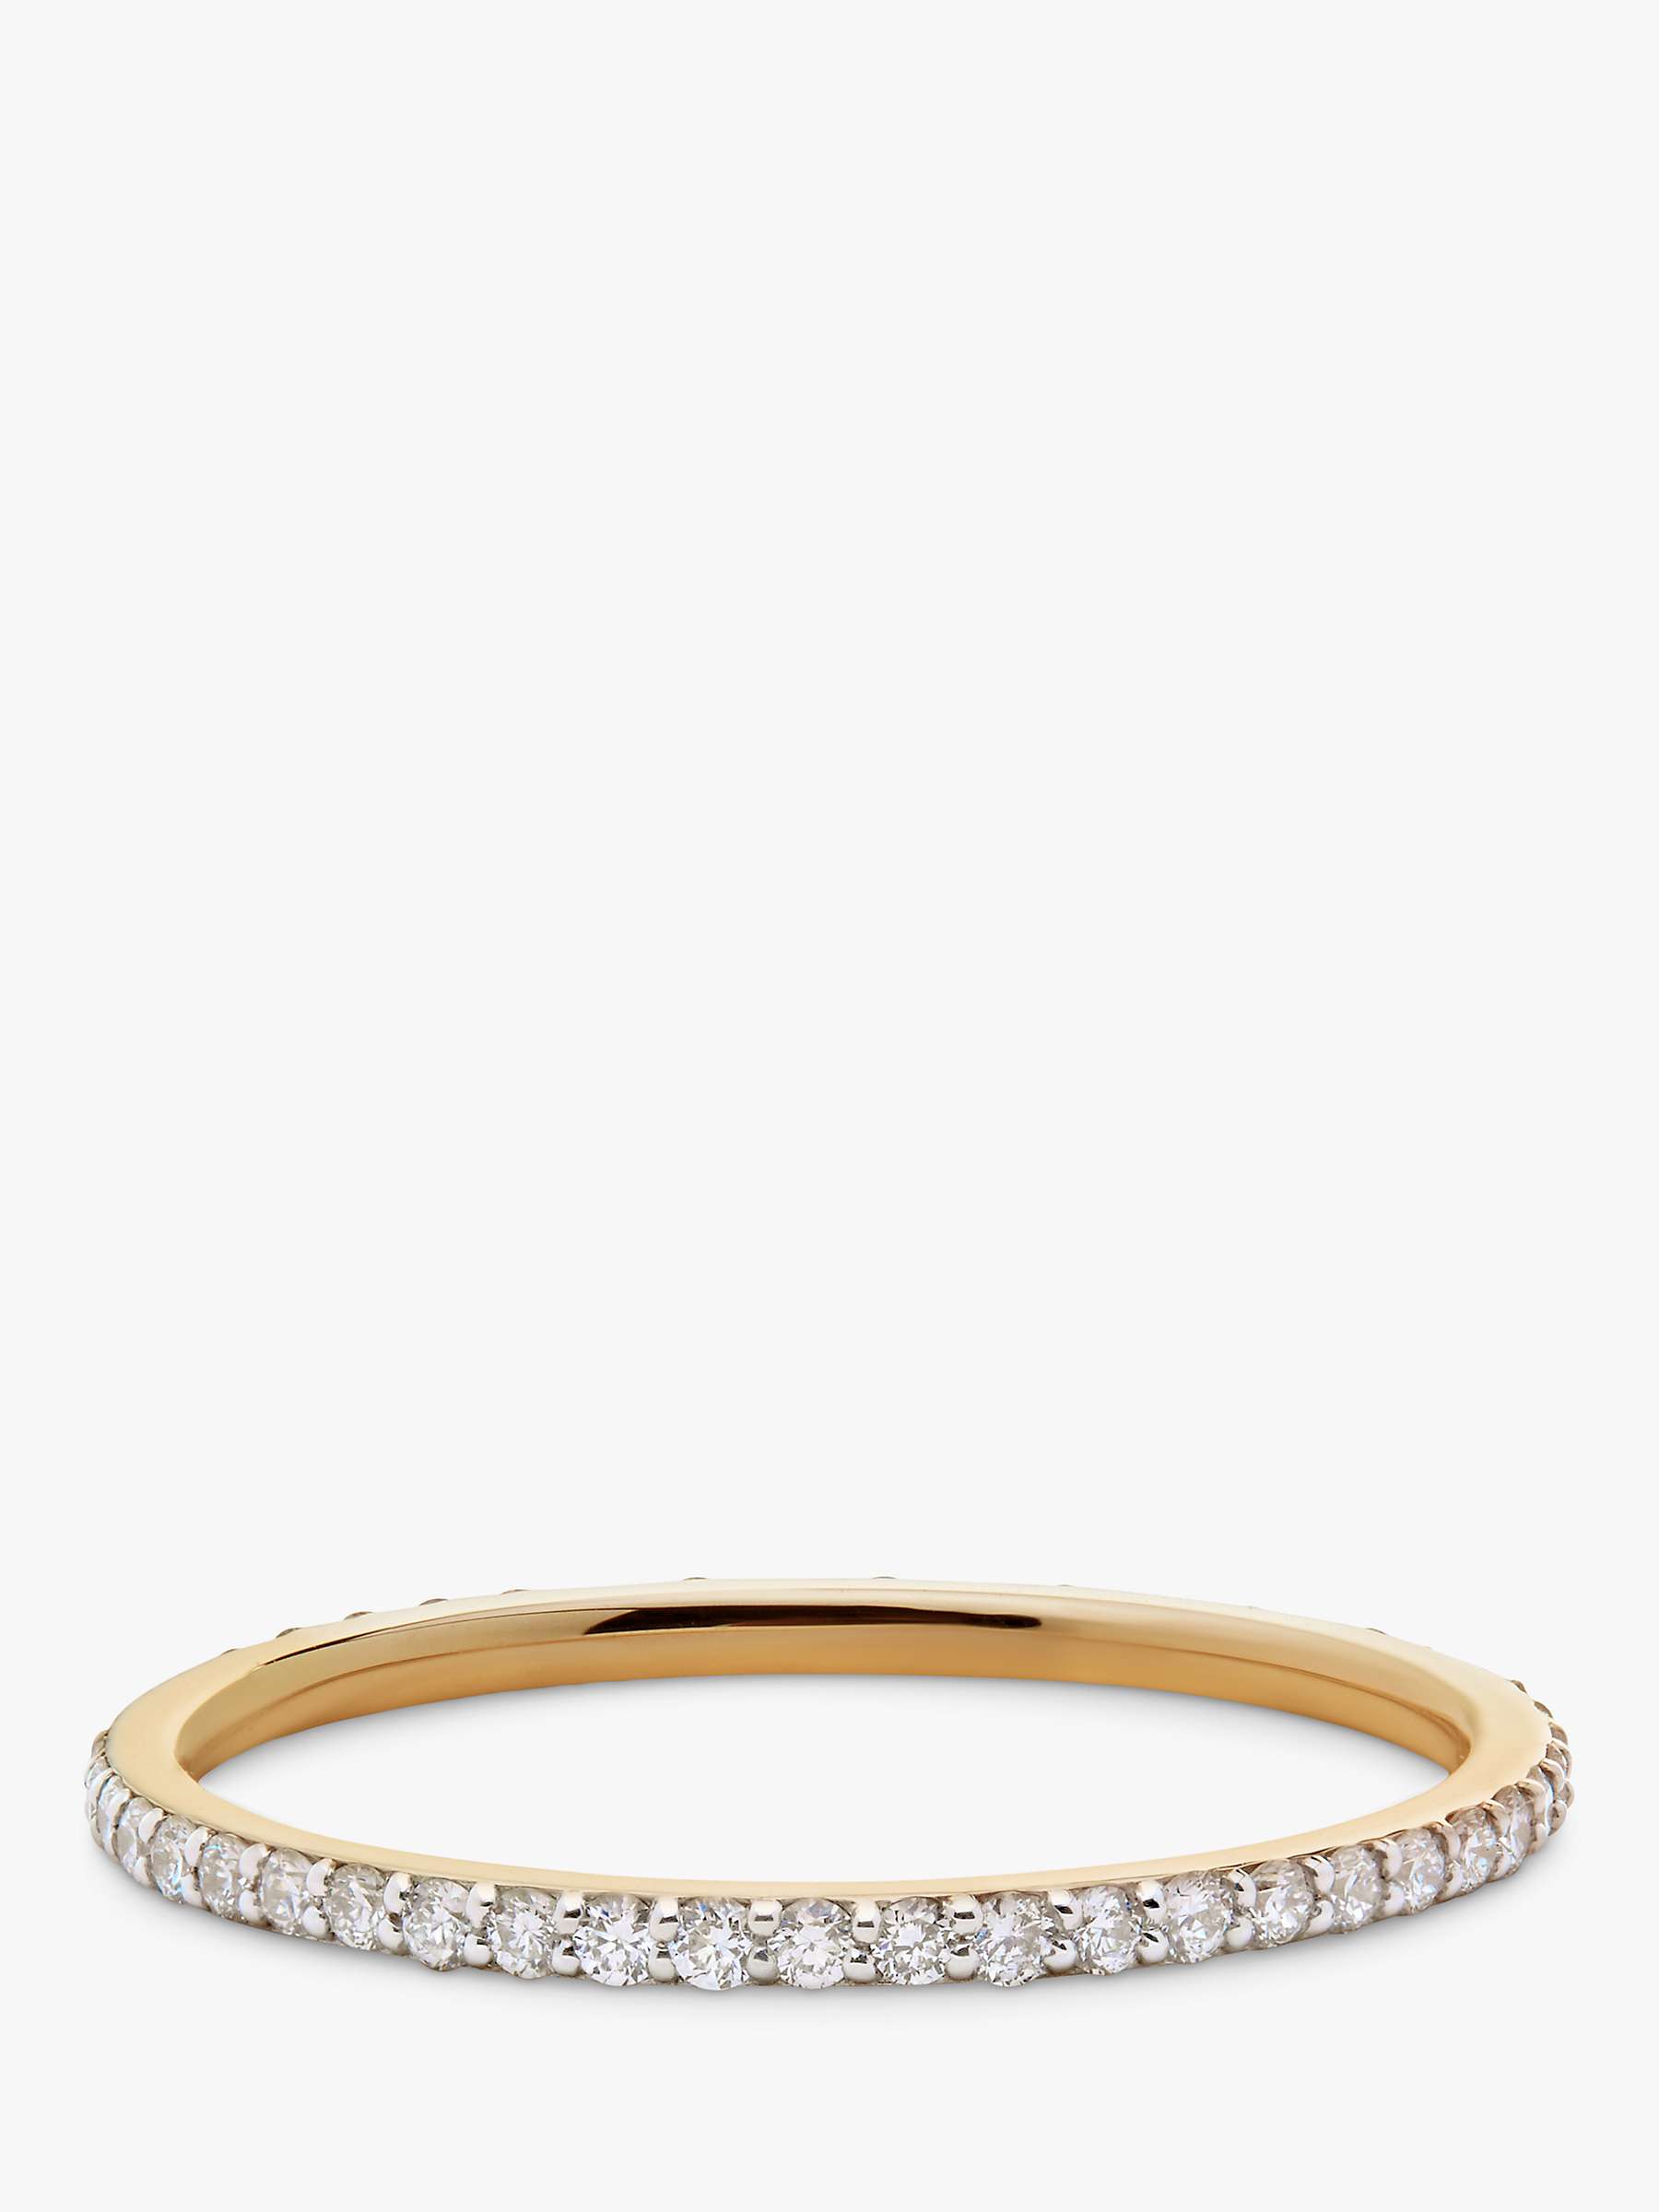 Buy Monica Vinader 14ct Yellow Gold Diamond Eternity Ring, Gold Online at johnlewis.com